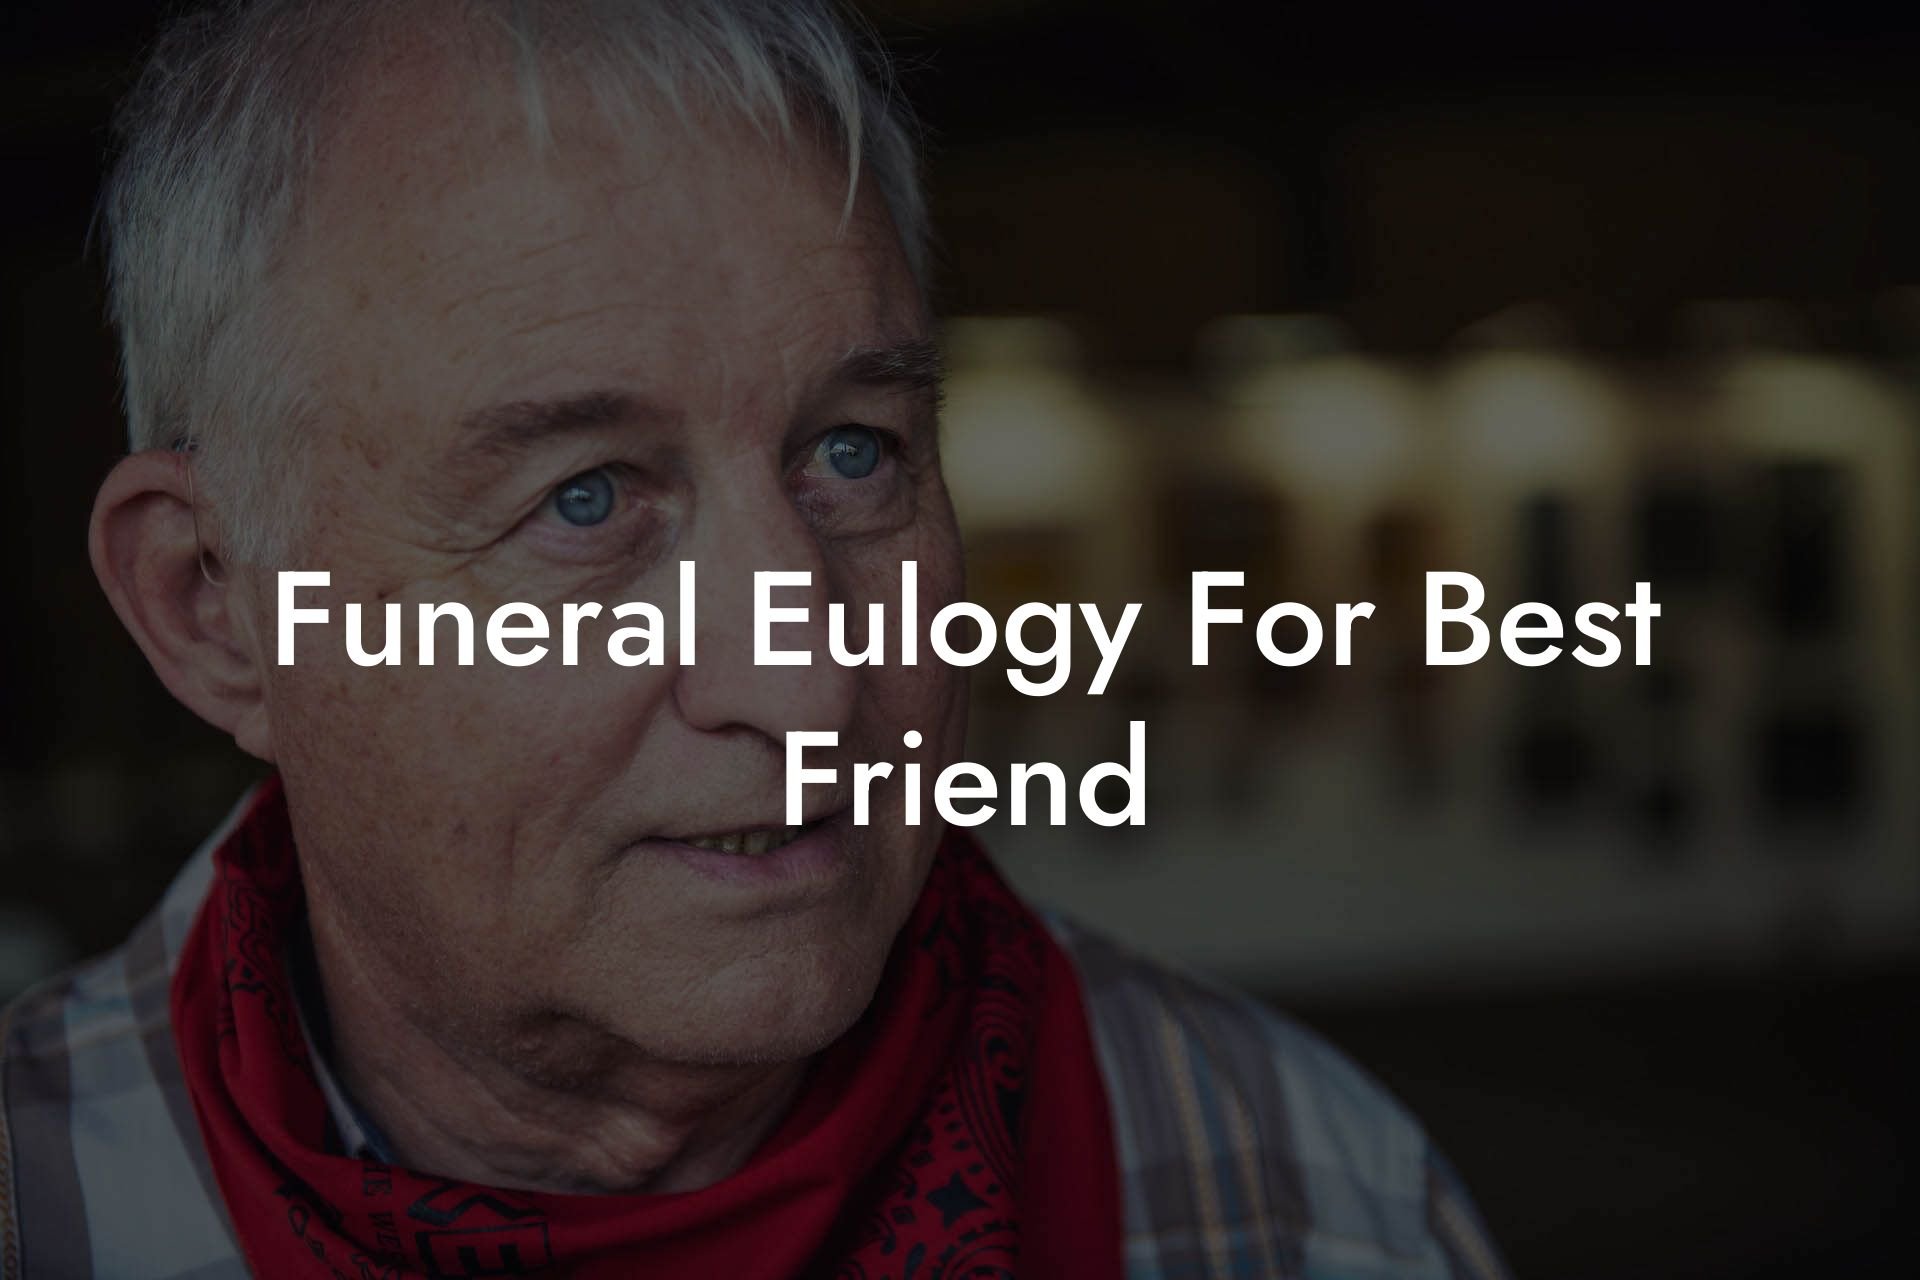 Funeral Eulogy For Best Friend